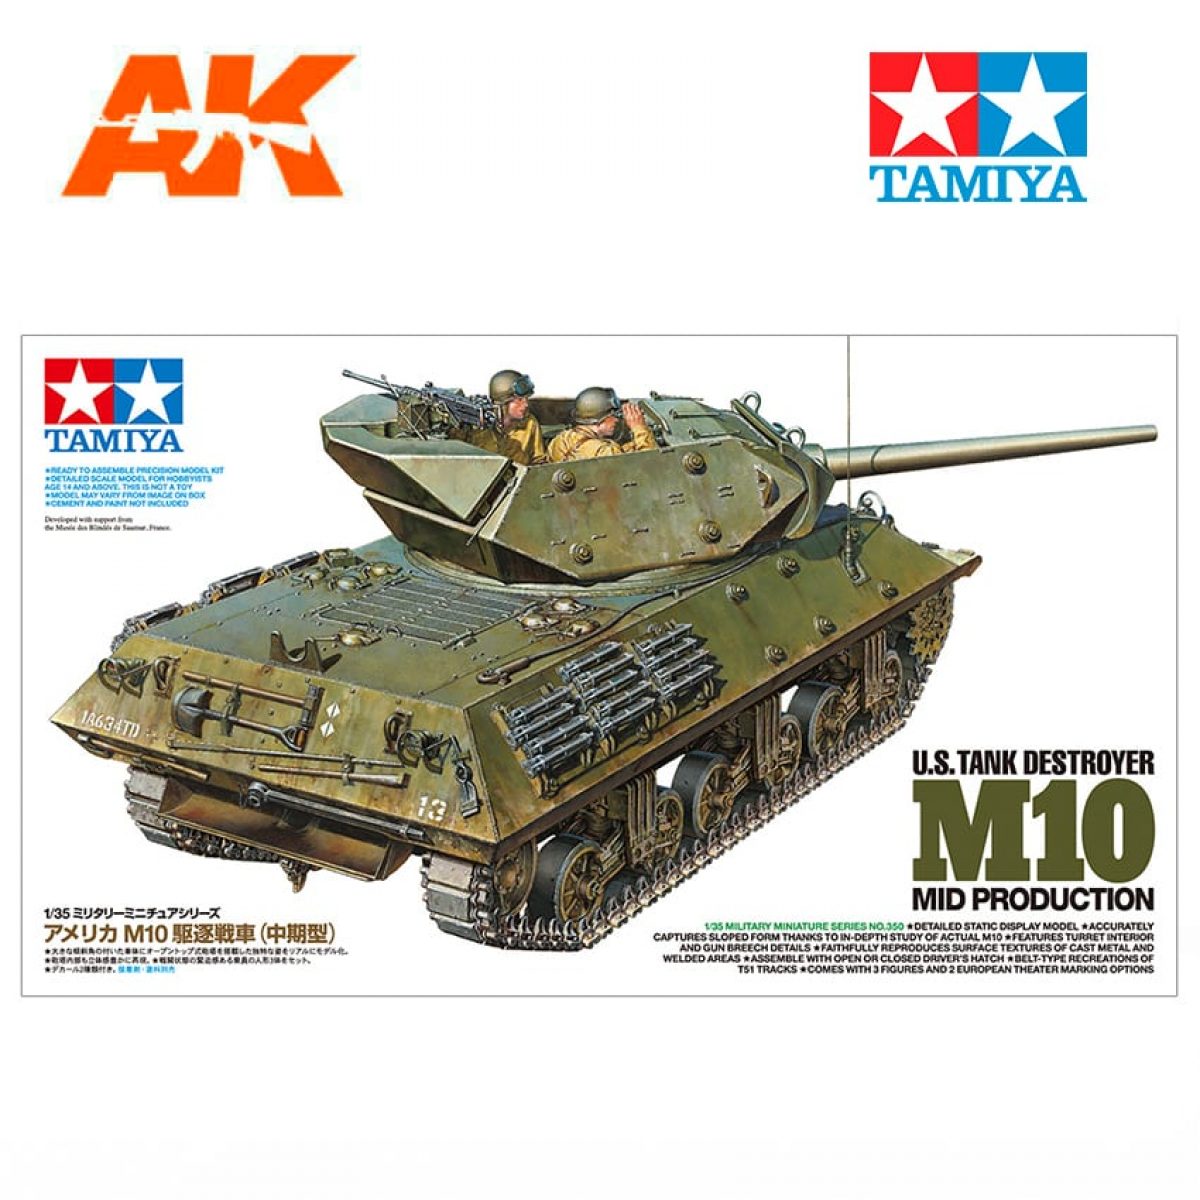 1/35 Academy US Tank Destroyer M 10 Gun Motor Carriage Highly Detailed # 1393 for sale online 